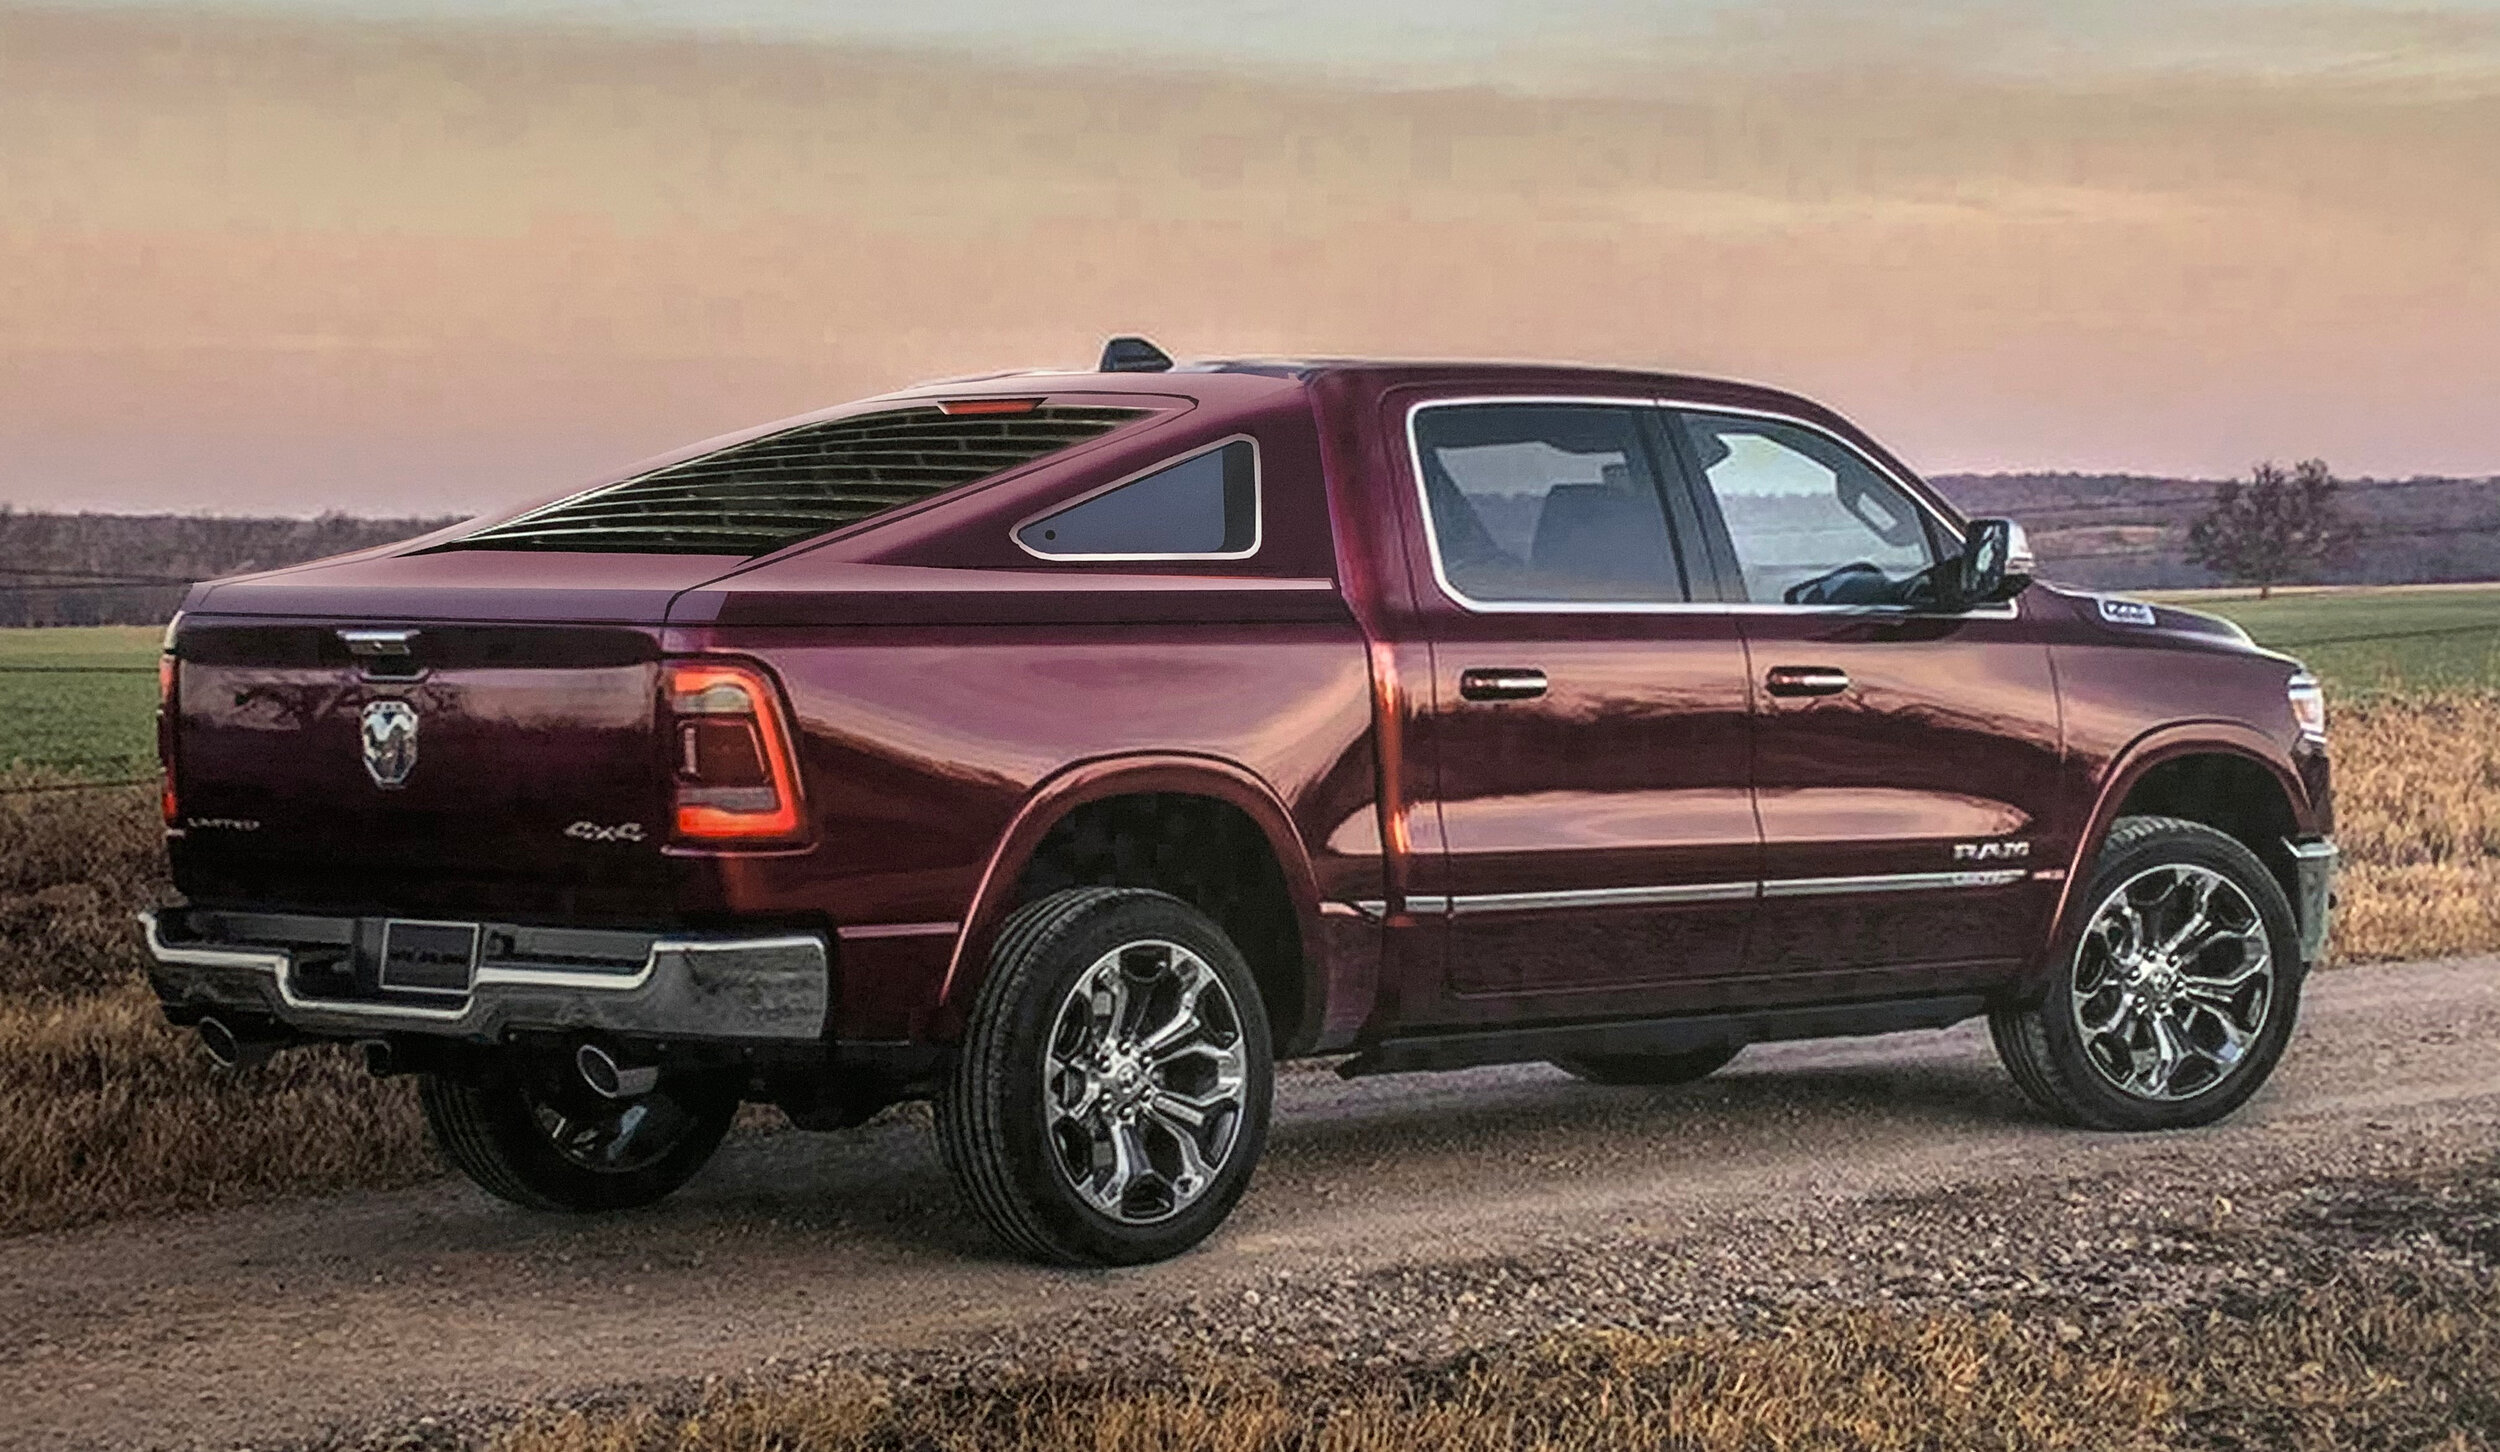  The Aero-X is currently not in production for RAM trucks due to Covid reducing our staff size.  